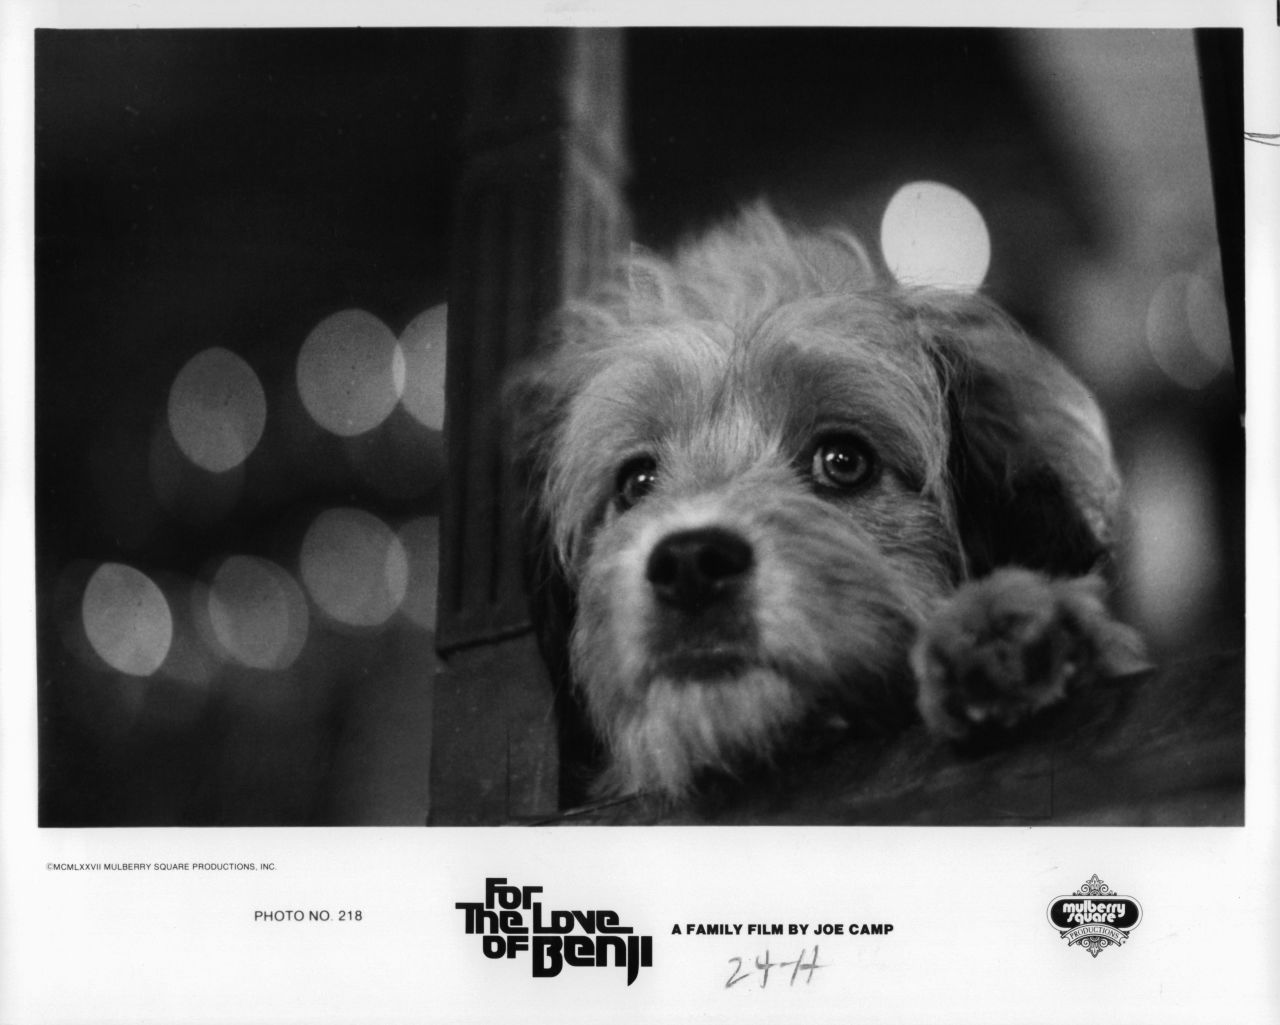 "Benji," about a goodhearted stray dog who saves the lives of two children, was a sleeper hit. It was among the top 10 box-office successes of 1974 and spawned a number of sequels.